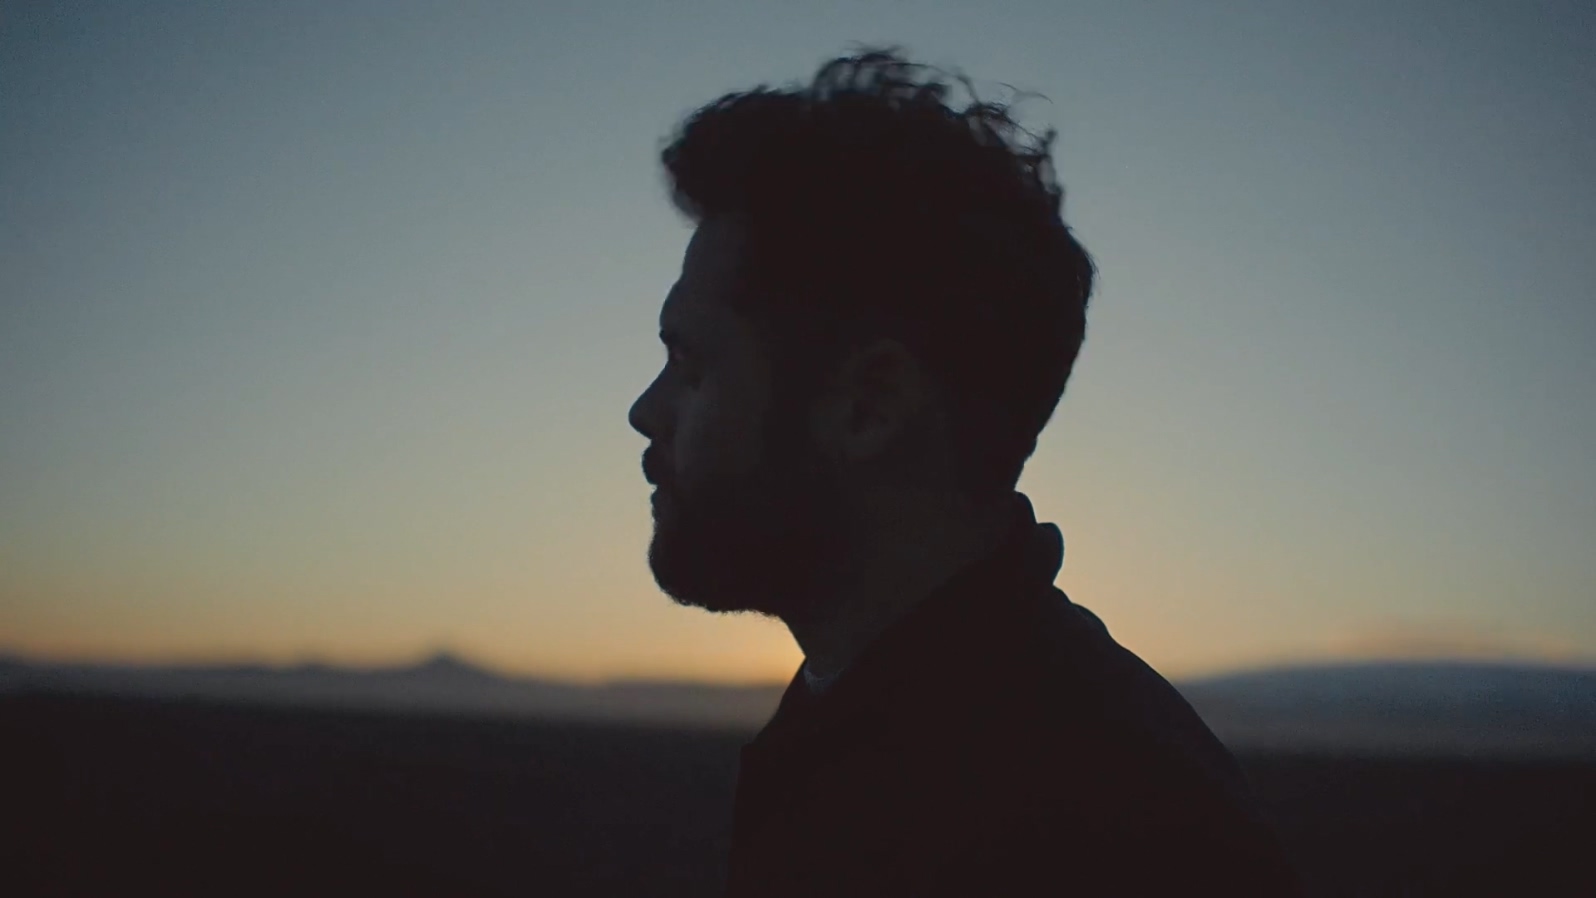 Passenger 《Everything》(Official Video) 1080P